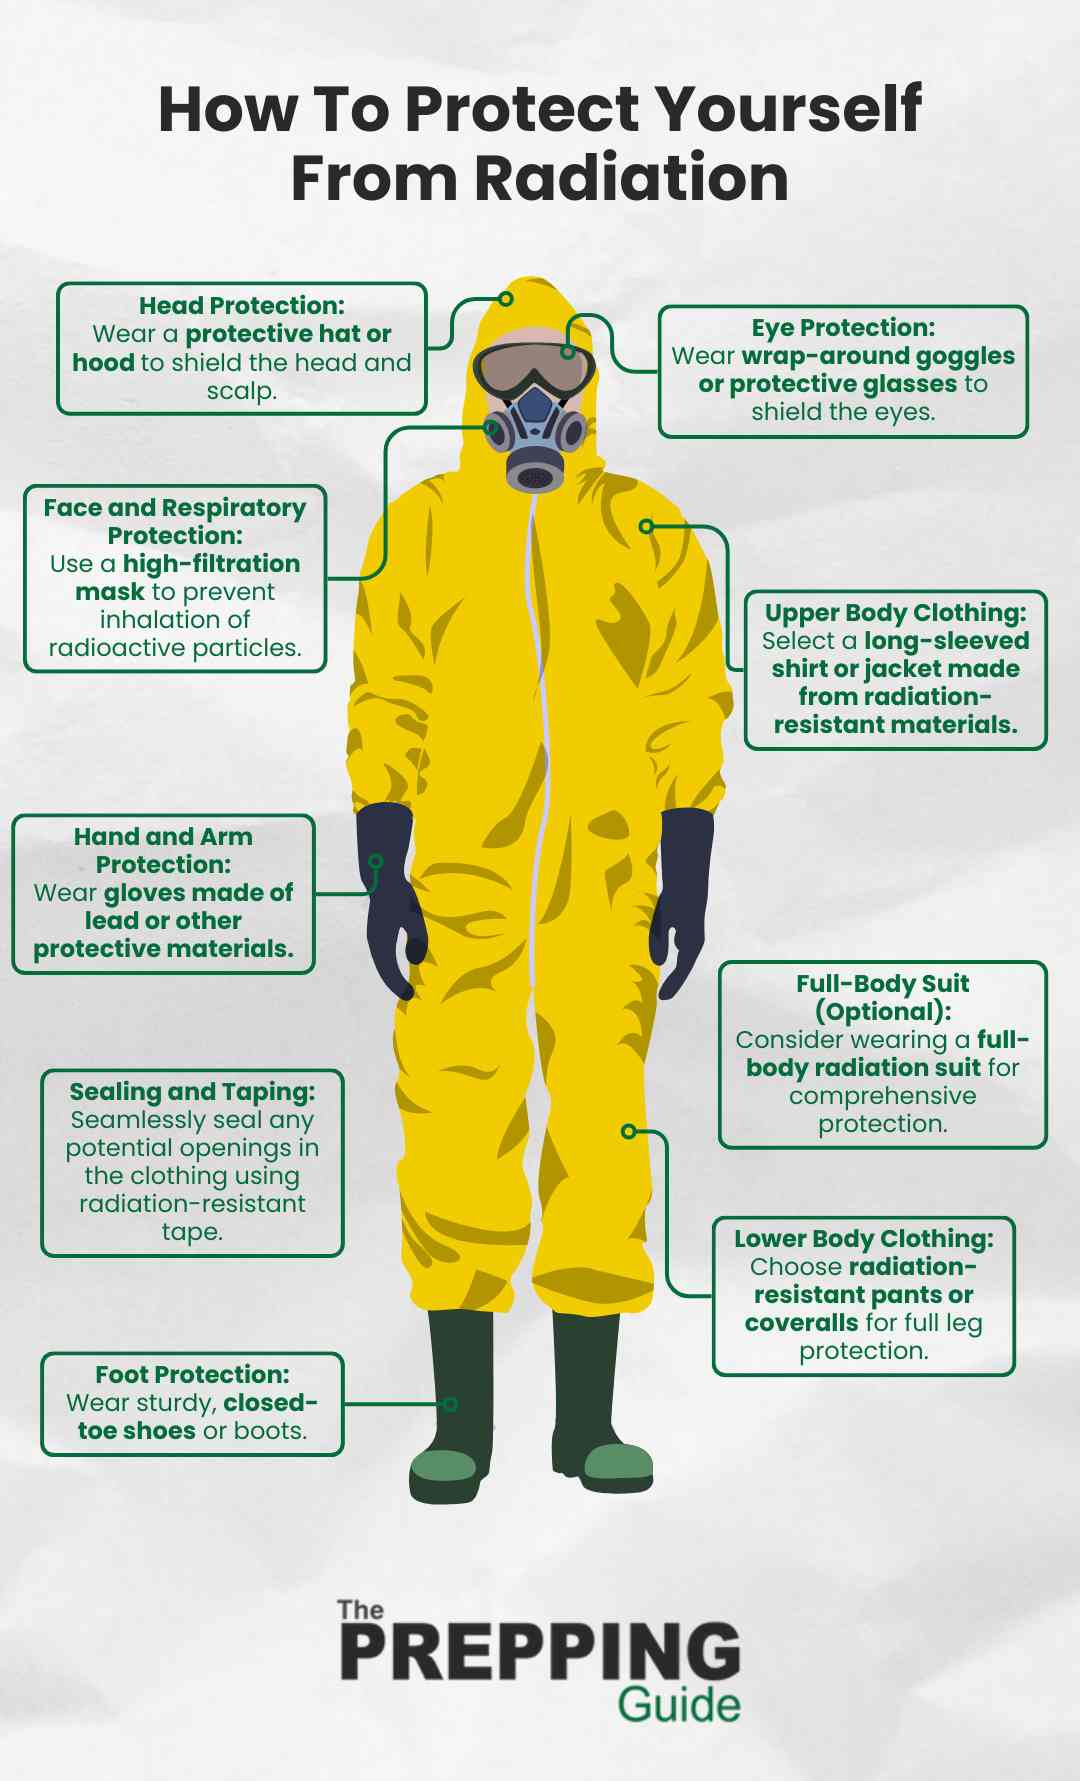 A guide on how to protect yourself from radiation.